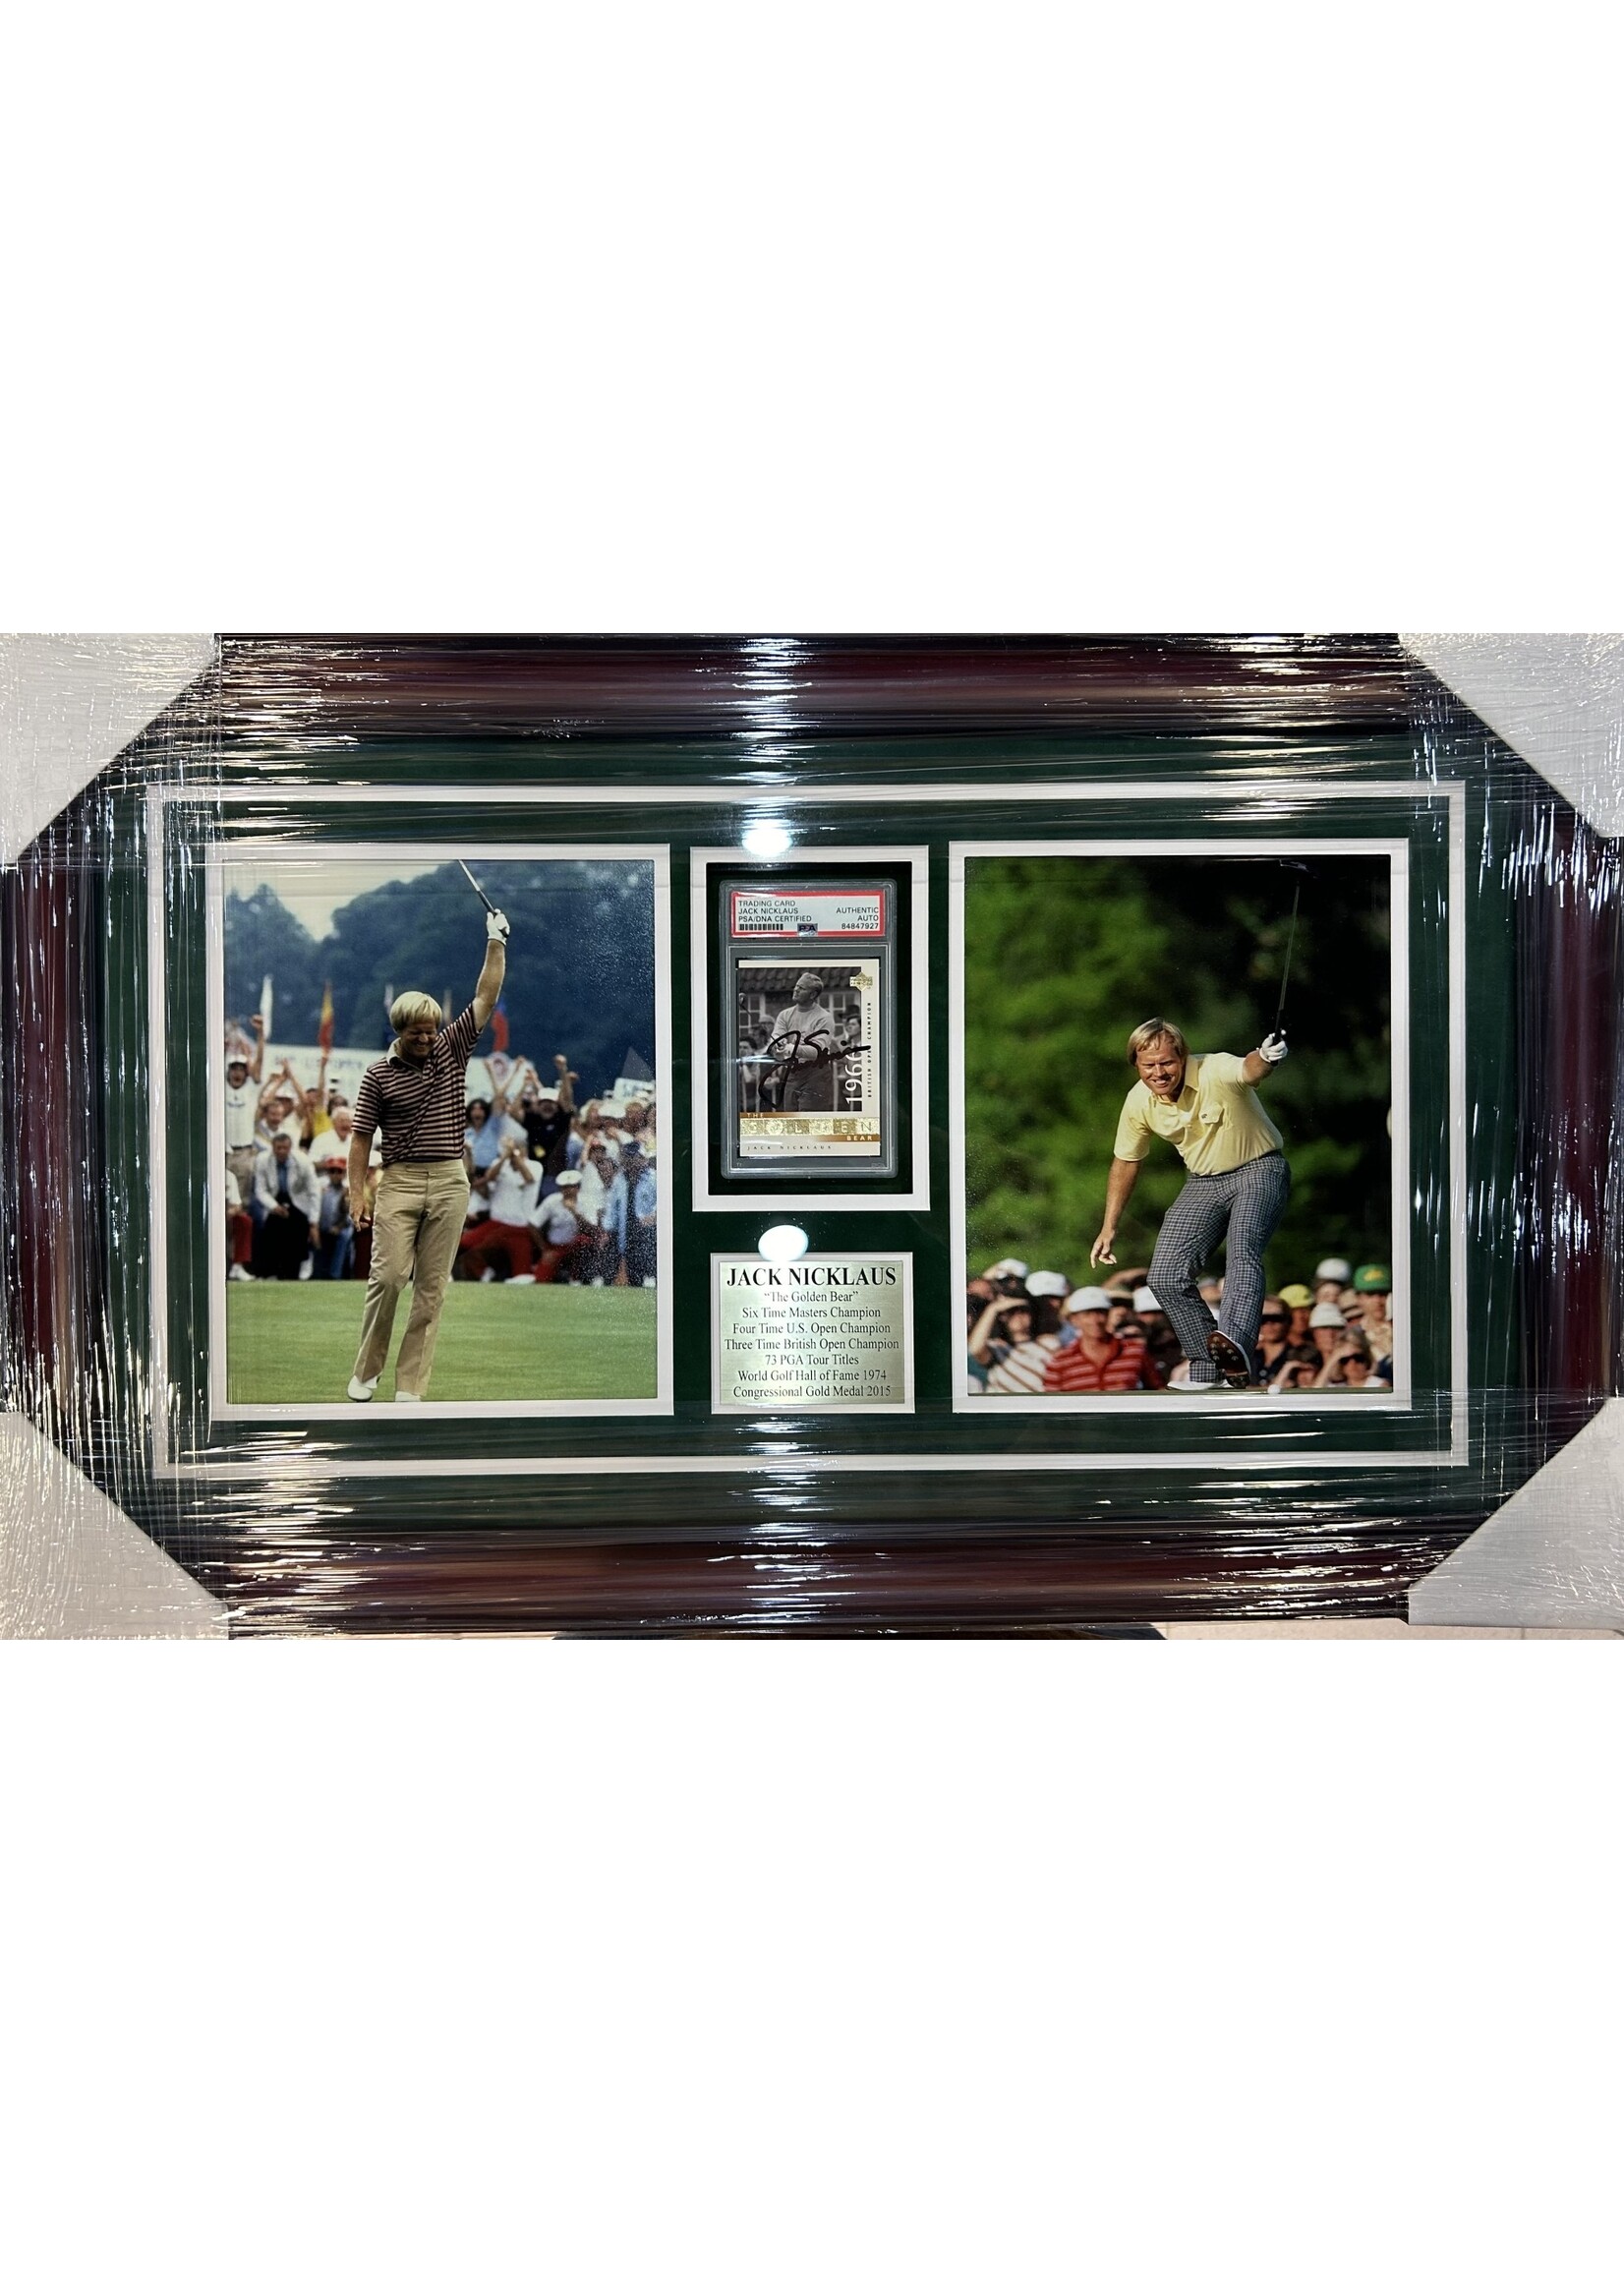 Jack Nicklaus Auto Card Collage